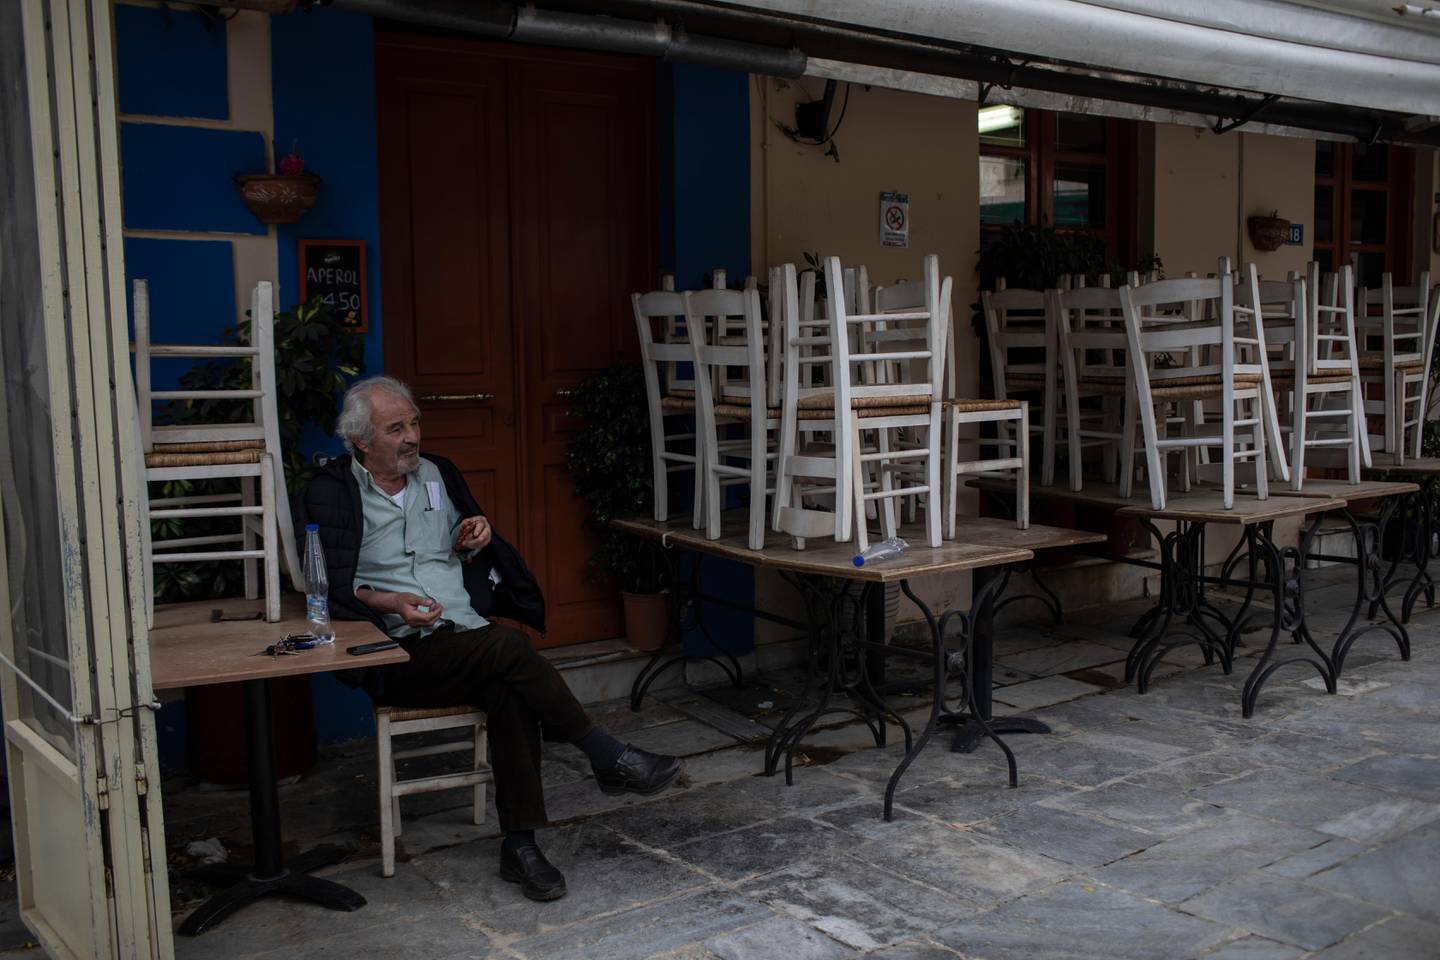 A man sits outside a closed restaurant in the traditional Plaka district of Athens, during lockdown measures to prevent the spread of the coronavirus, on Thursday, April 30, 2020. Greek authorities say the use of face masks will be compulsory on public transport and shops from May 4, when the country starts to ease its lockdown restrictions. (AP Photo/Petros Giannakouris)